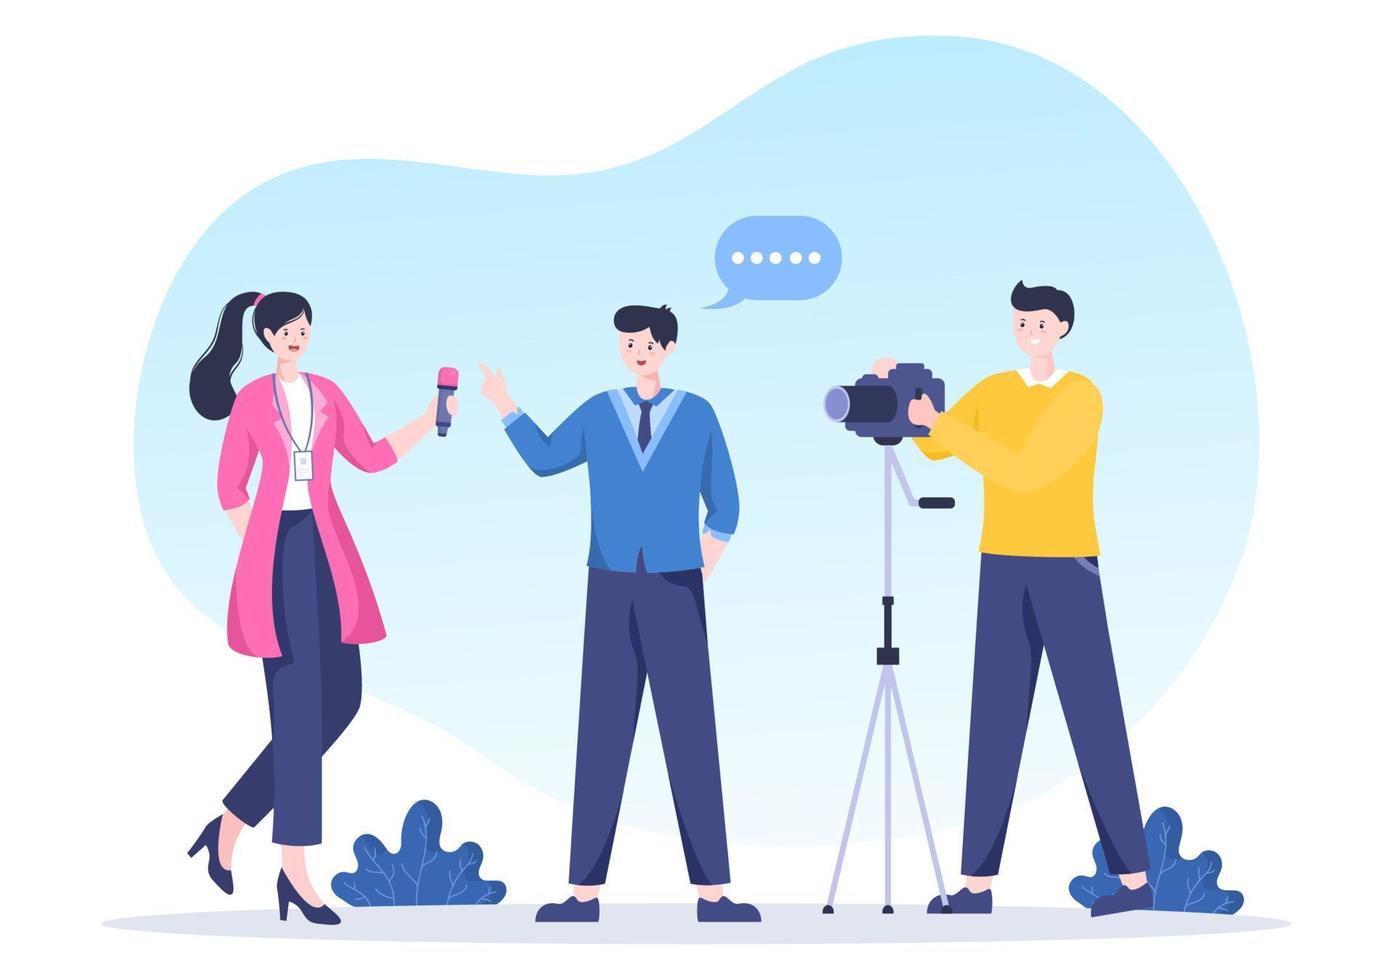 Journalism or Social Broadcasting with Equipment, News, Microphones, Reporter and Interview Speech Media Event in Flat Style Cartoon Illustration vector